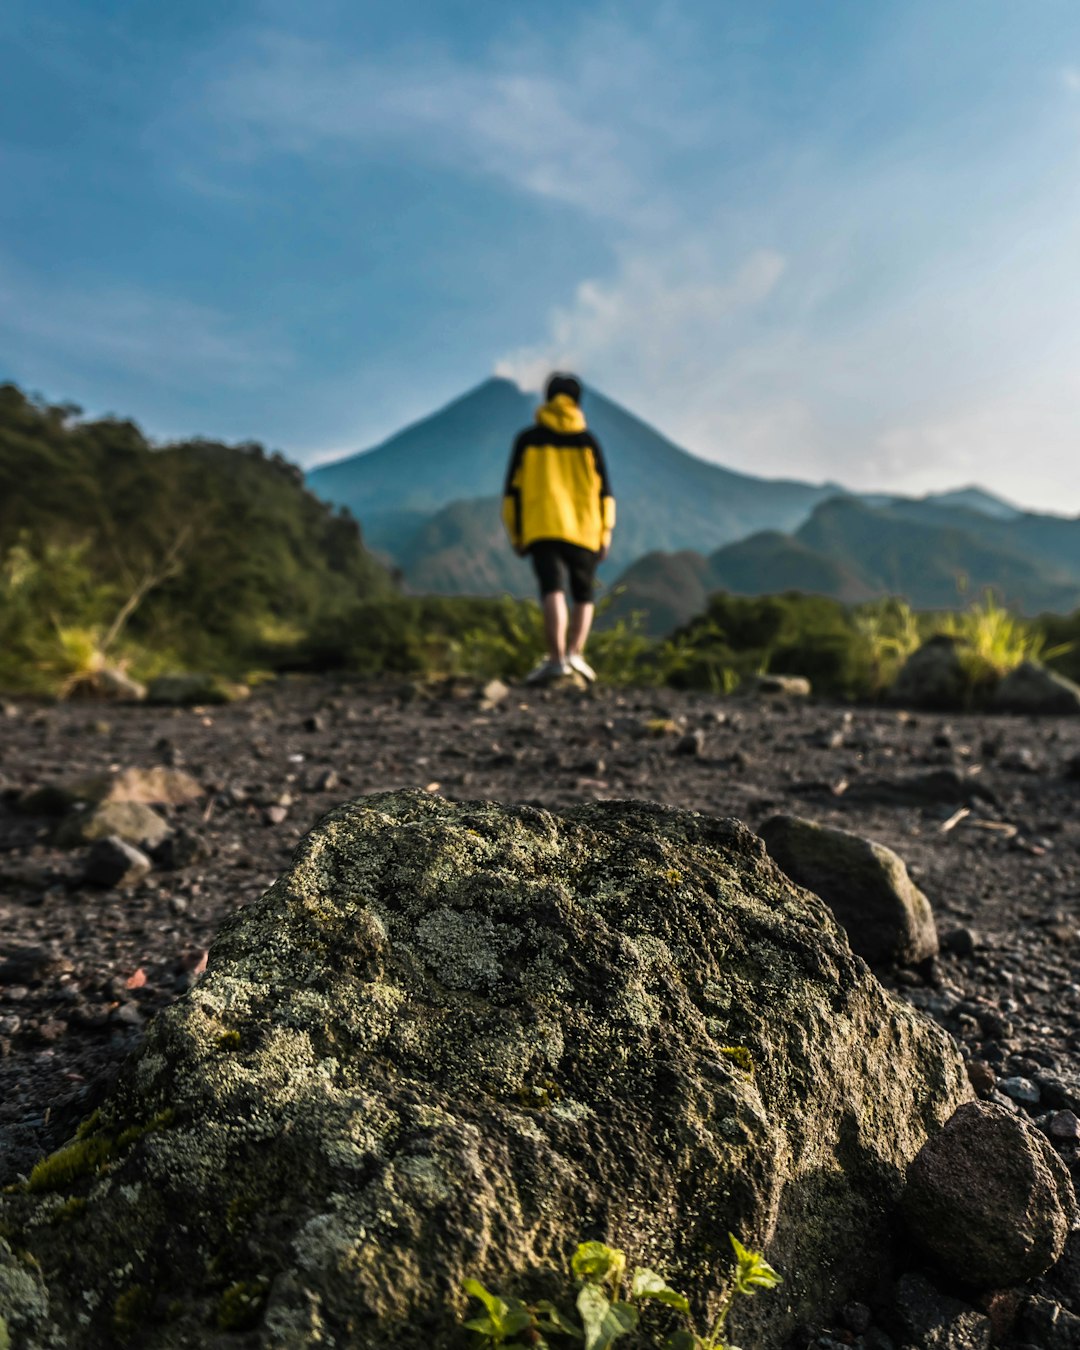 travelers stories about Hill in Bunker Kaliadem Merapi, Indonesia